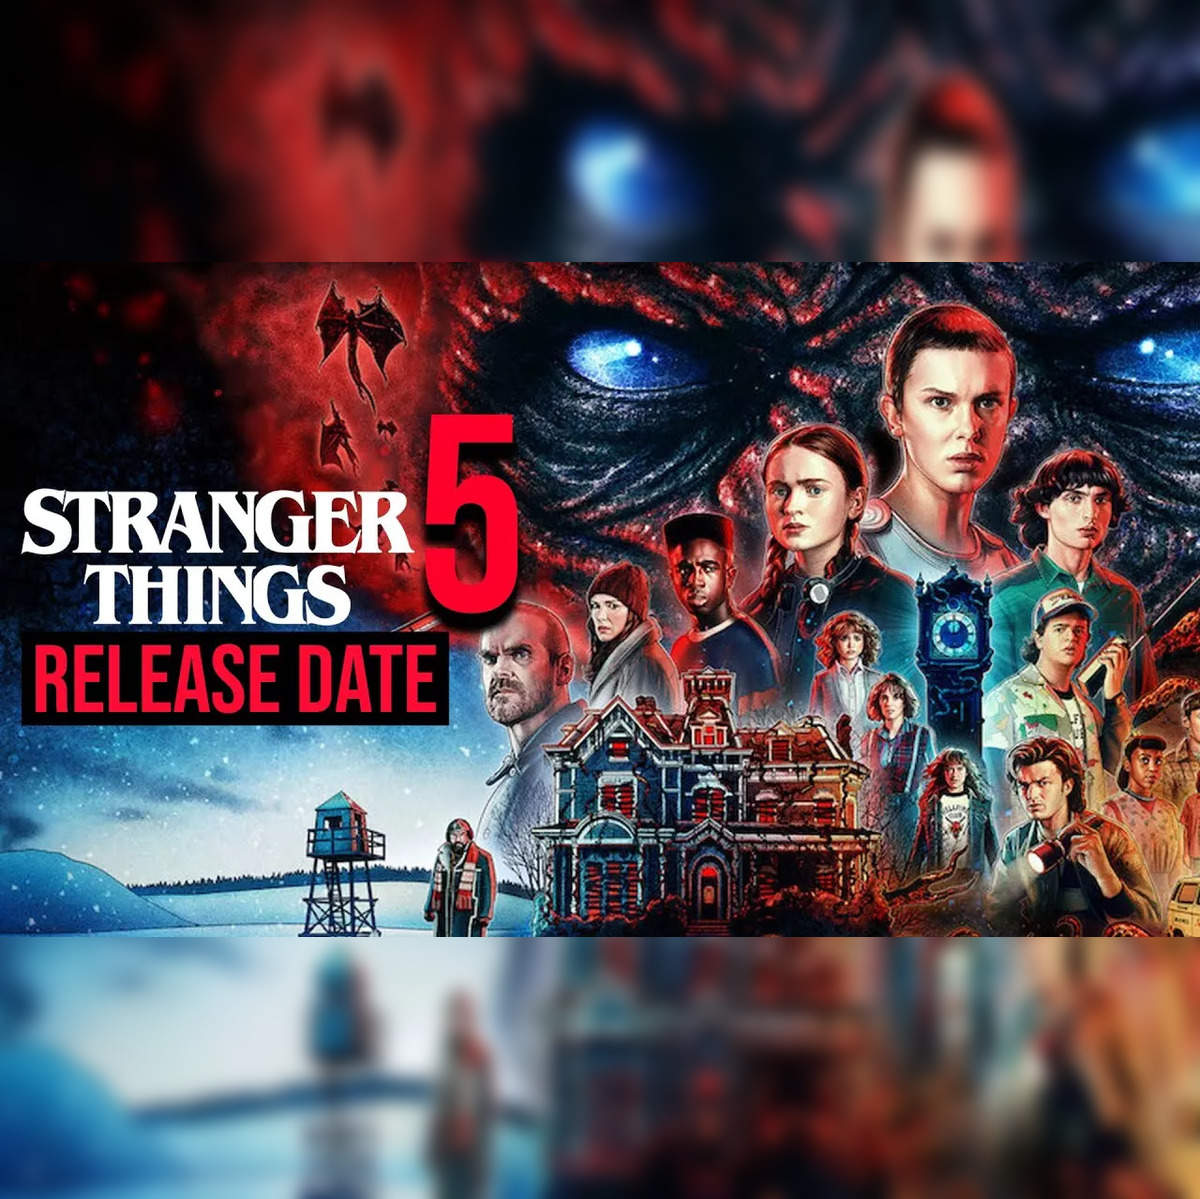 Stranger Things Season 4 Gets Netflix Premiere Dates, Show to End